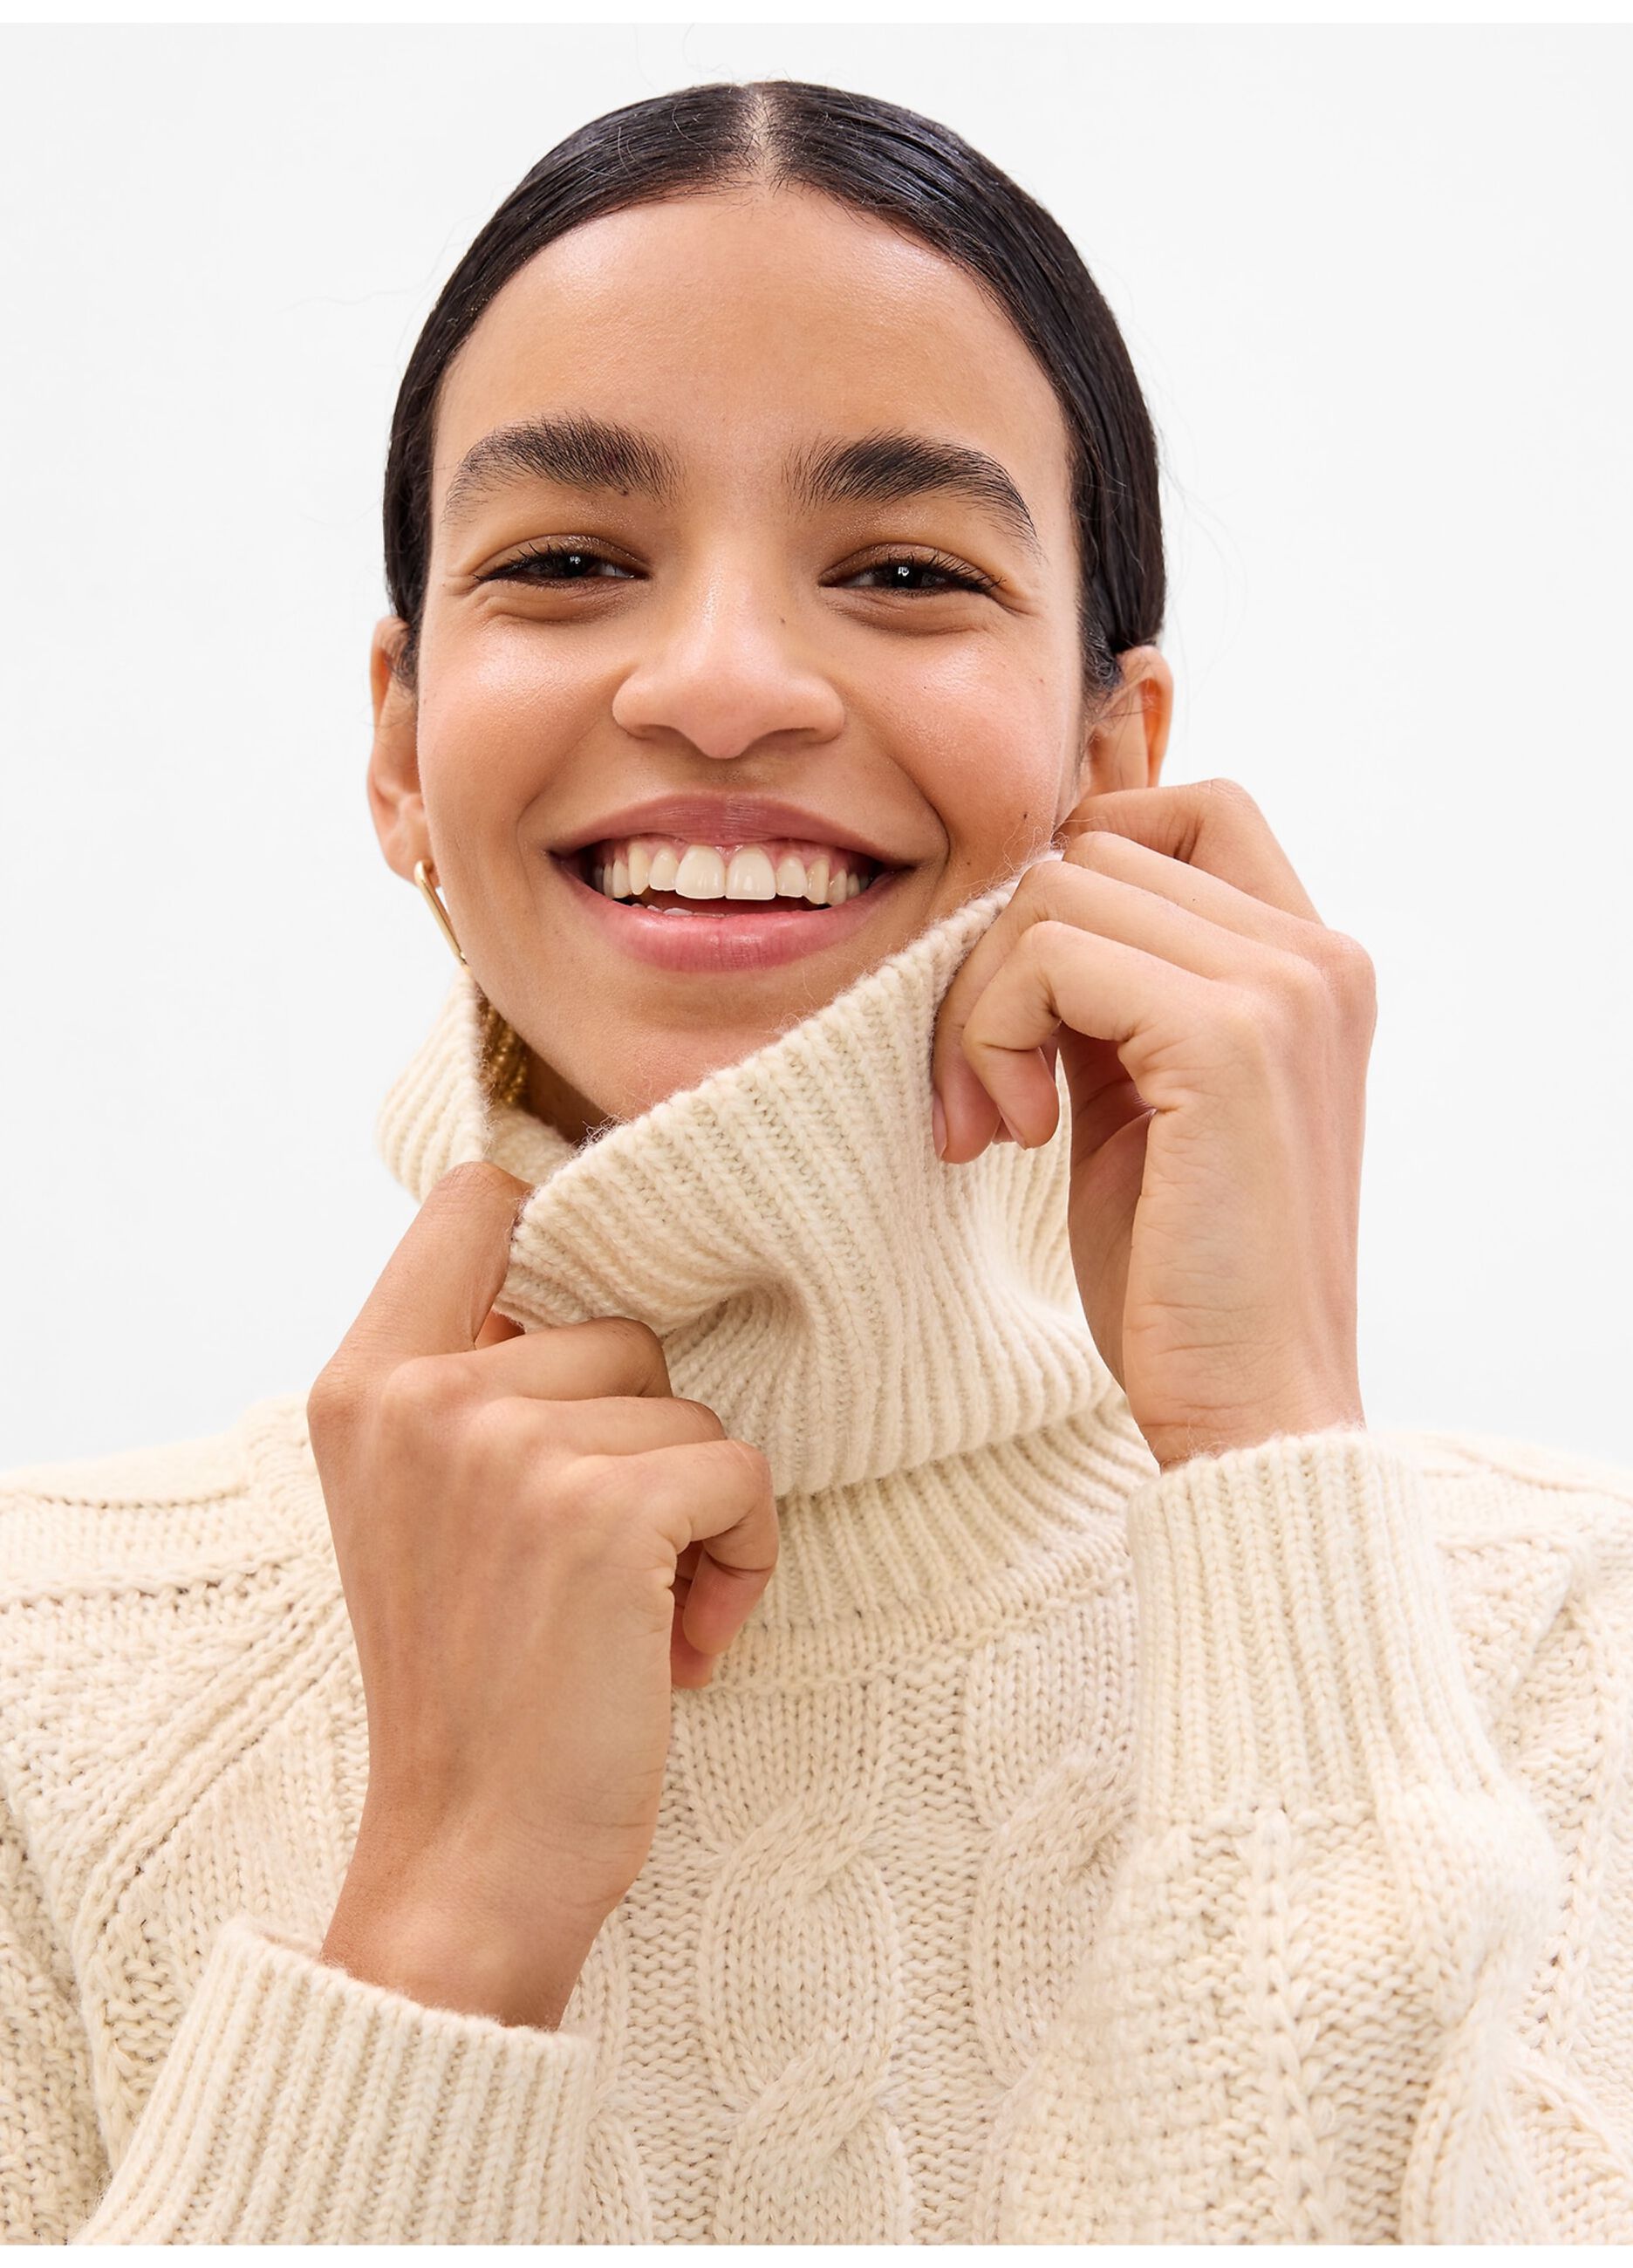 Turtleneck with cable design